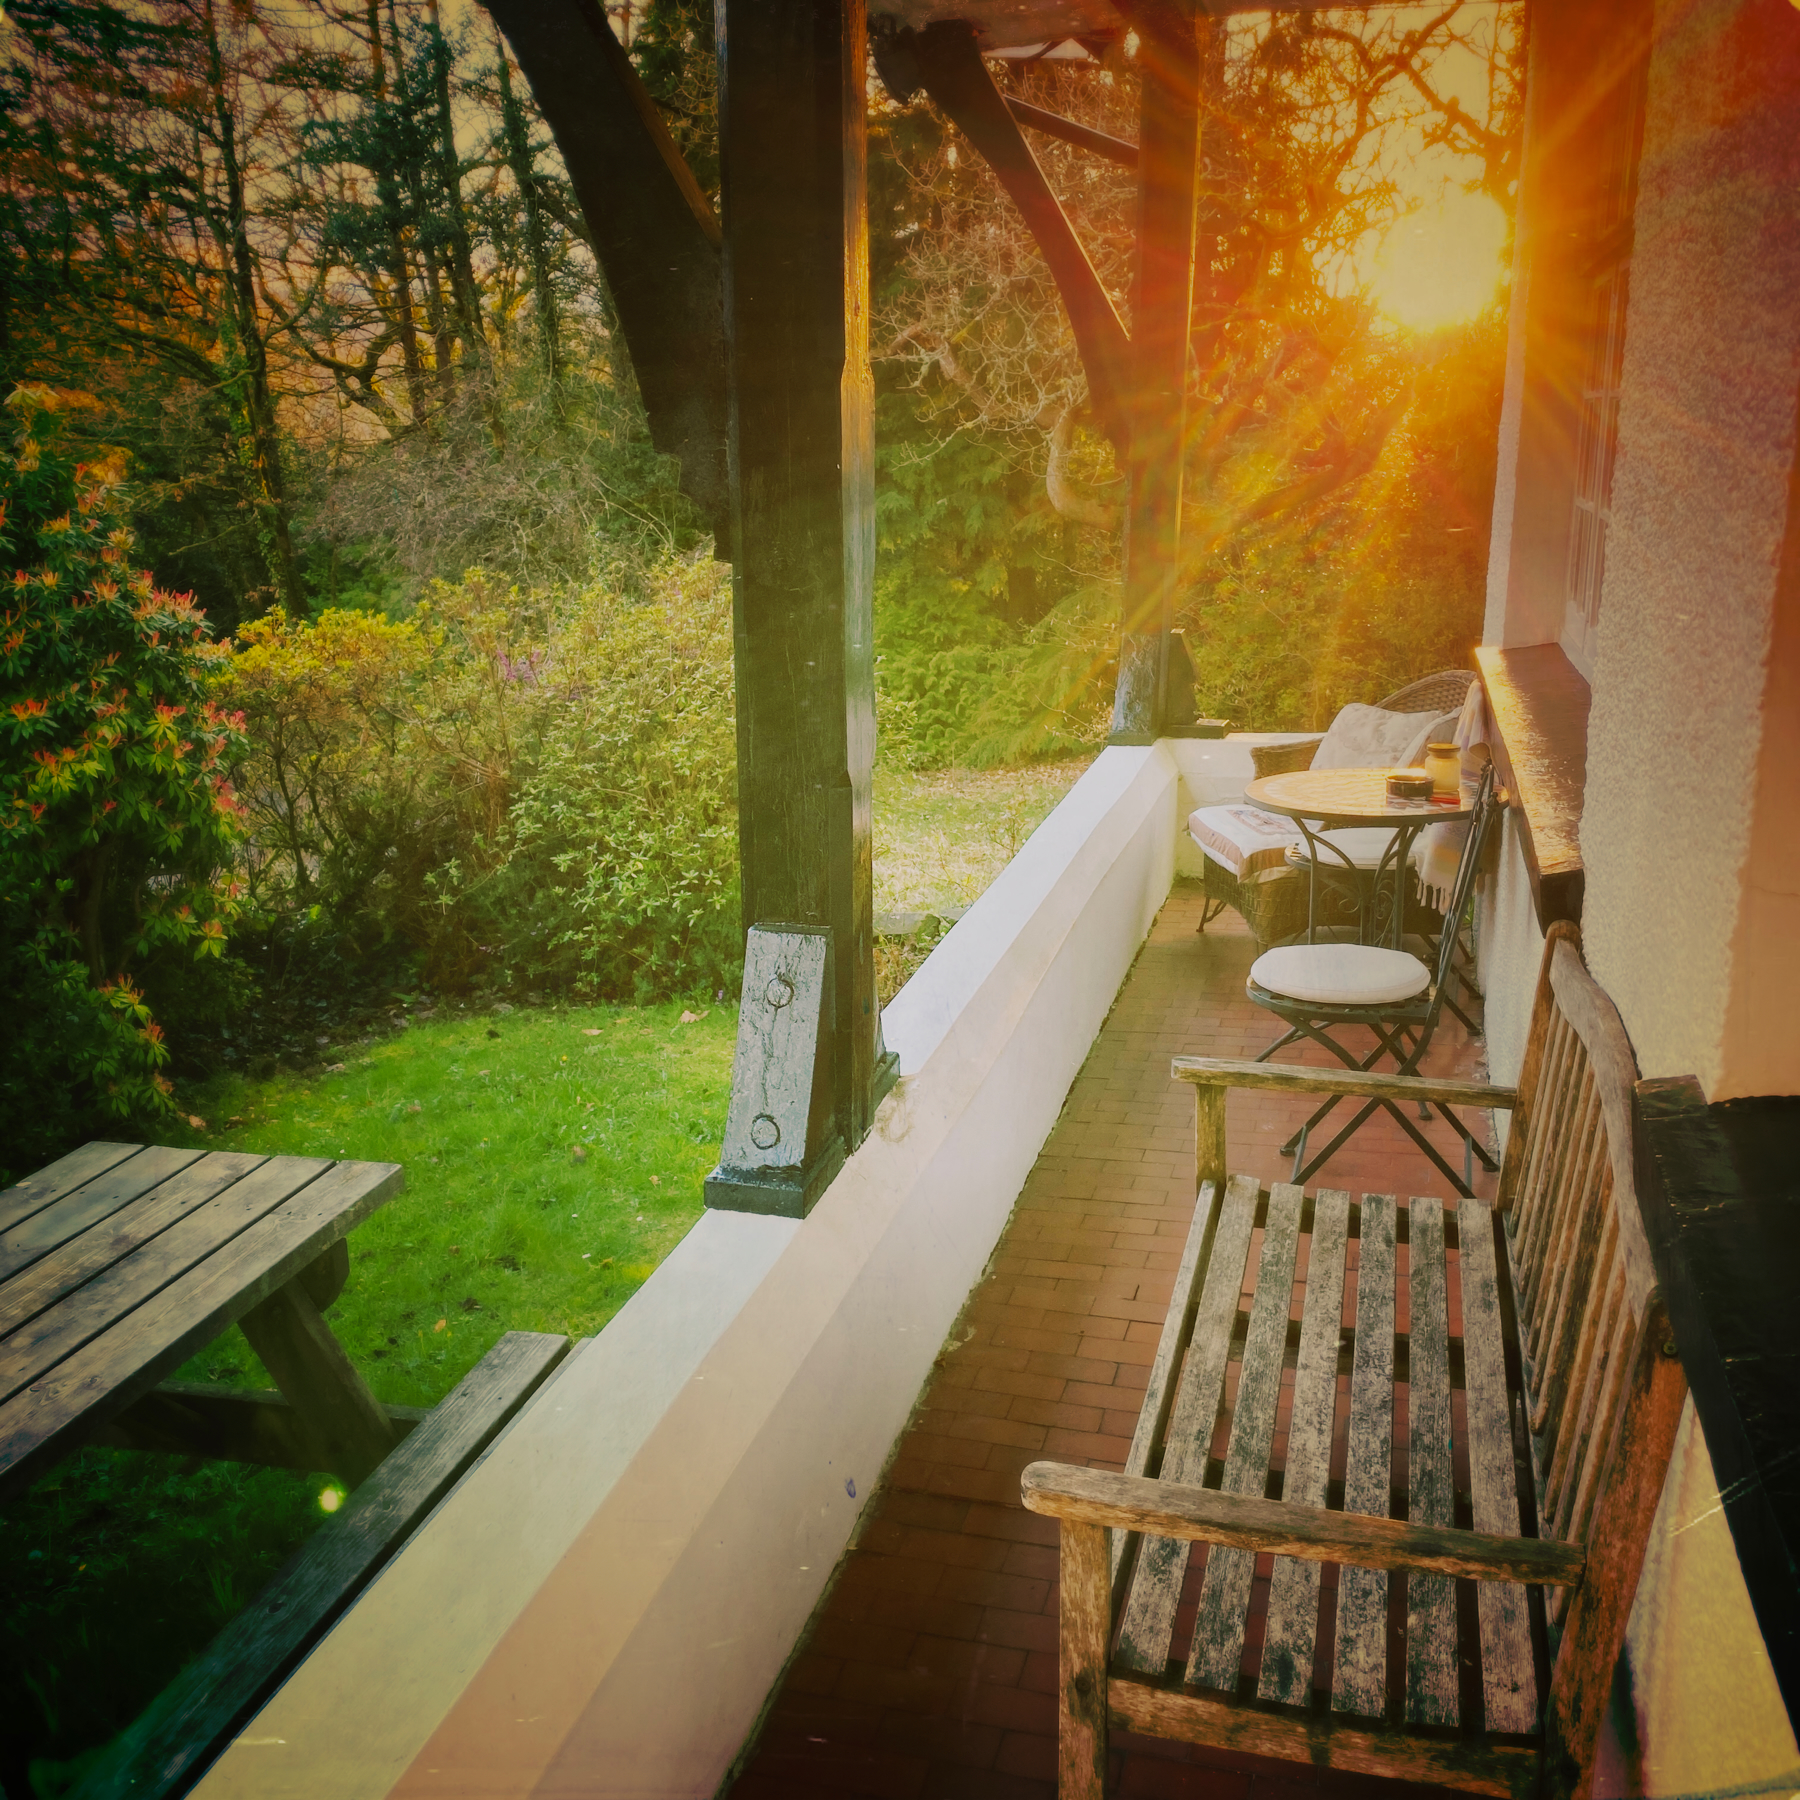 Evening sun shining across a small balcony with bench and table